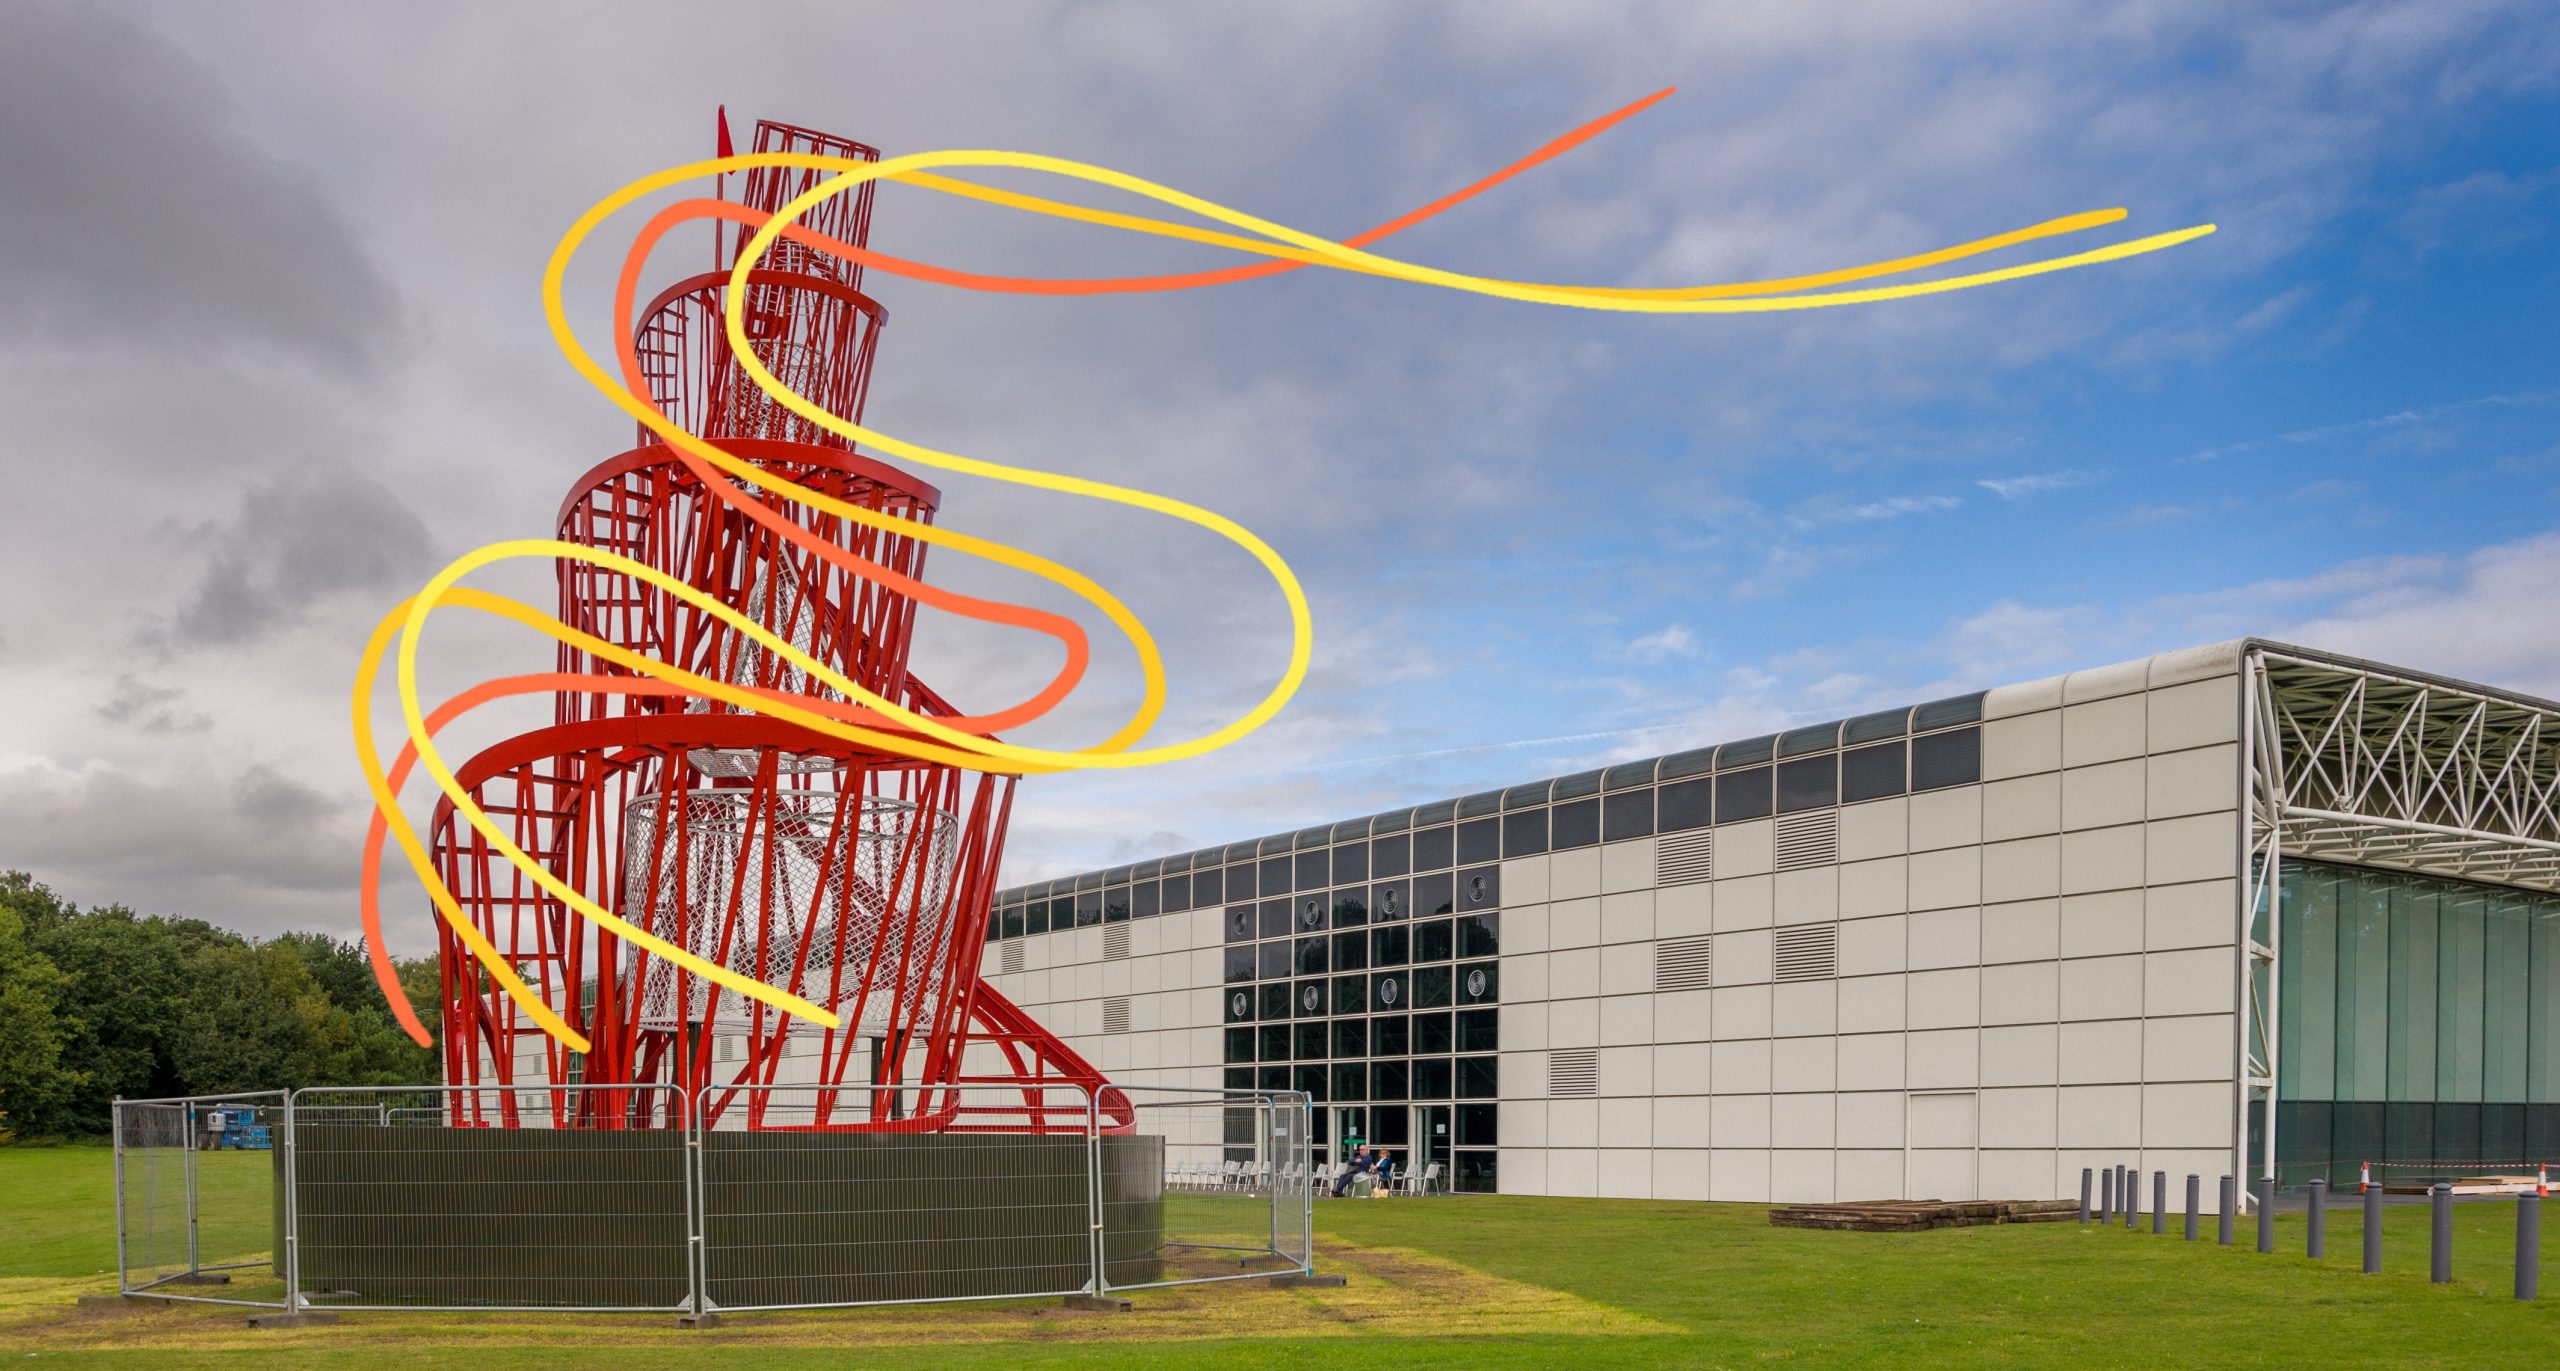 Large red sculpture in the shape of a twisting tower with waves of orange and yellow surrounding it